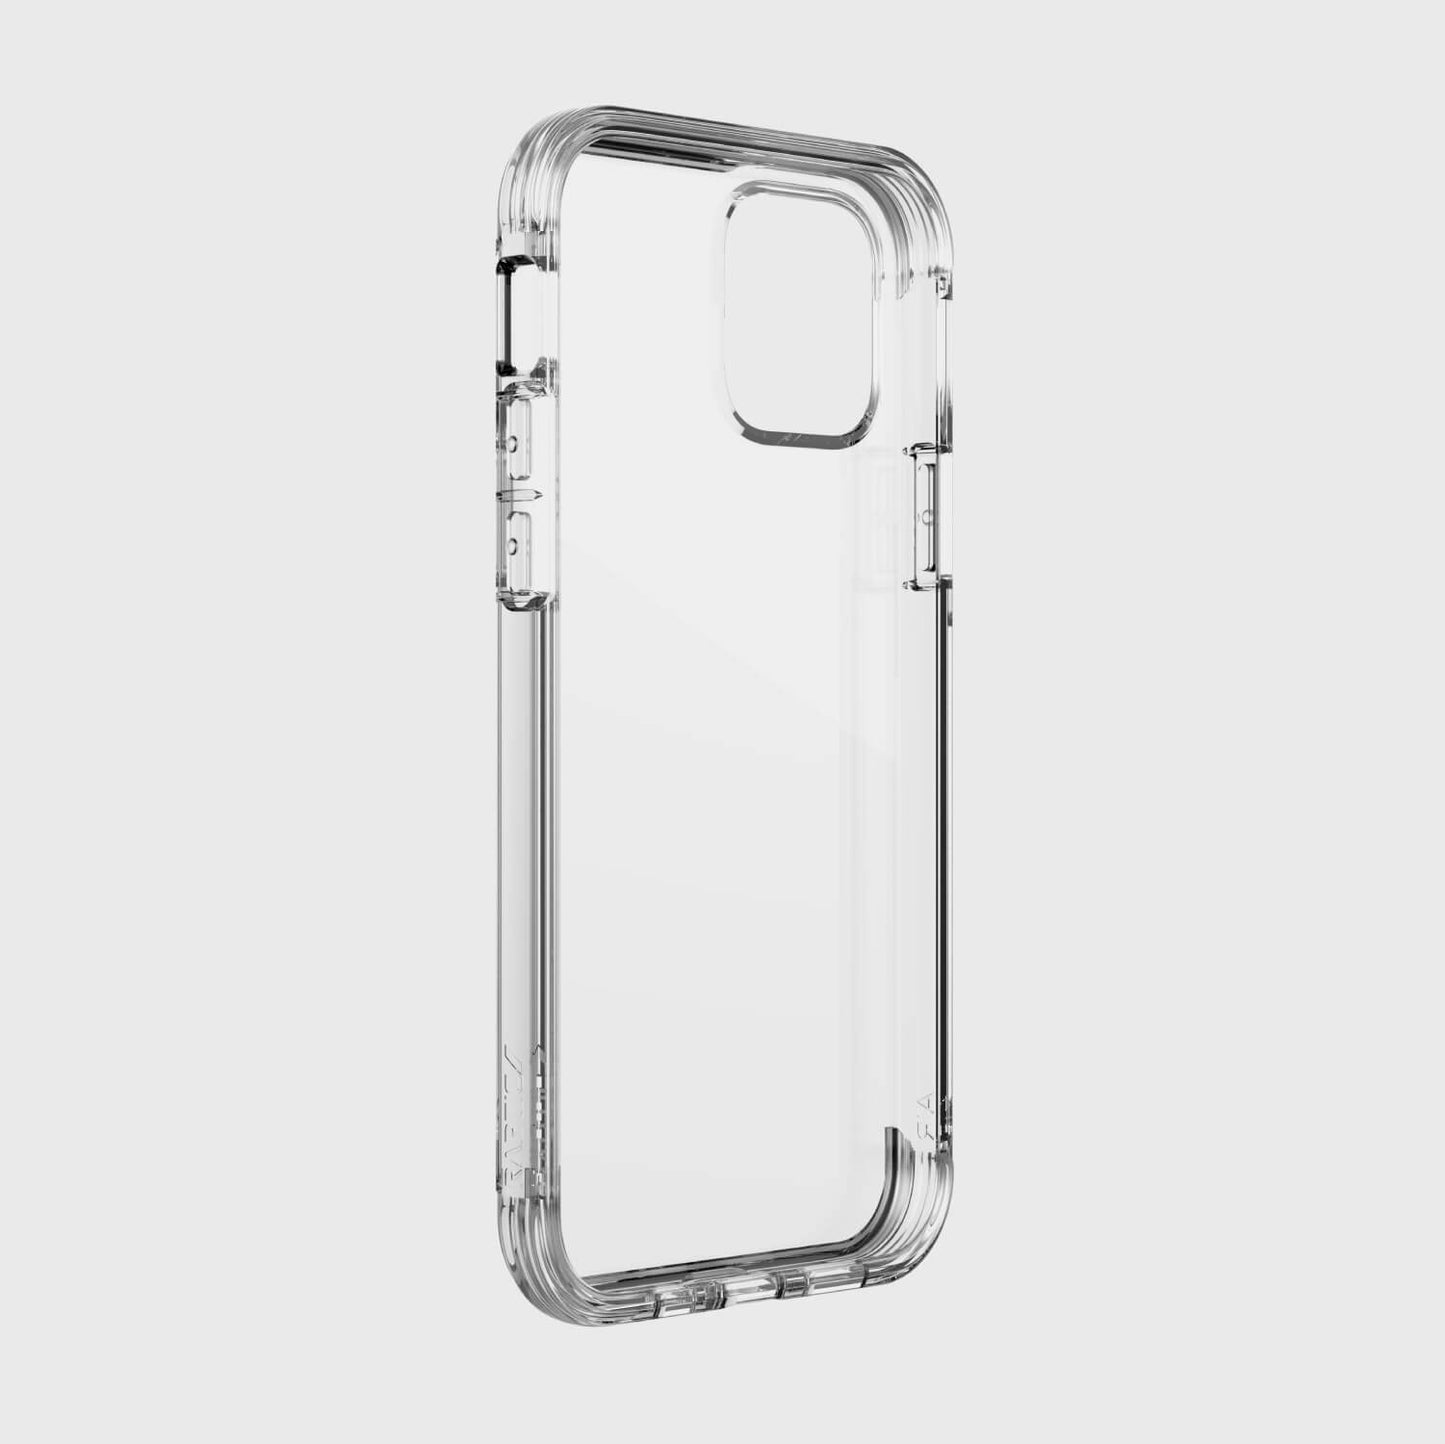 A clear Raptic iPhone 12 & iPhone 12 Pro Case - AIR for 13-foot drop protection on a white background.